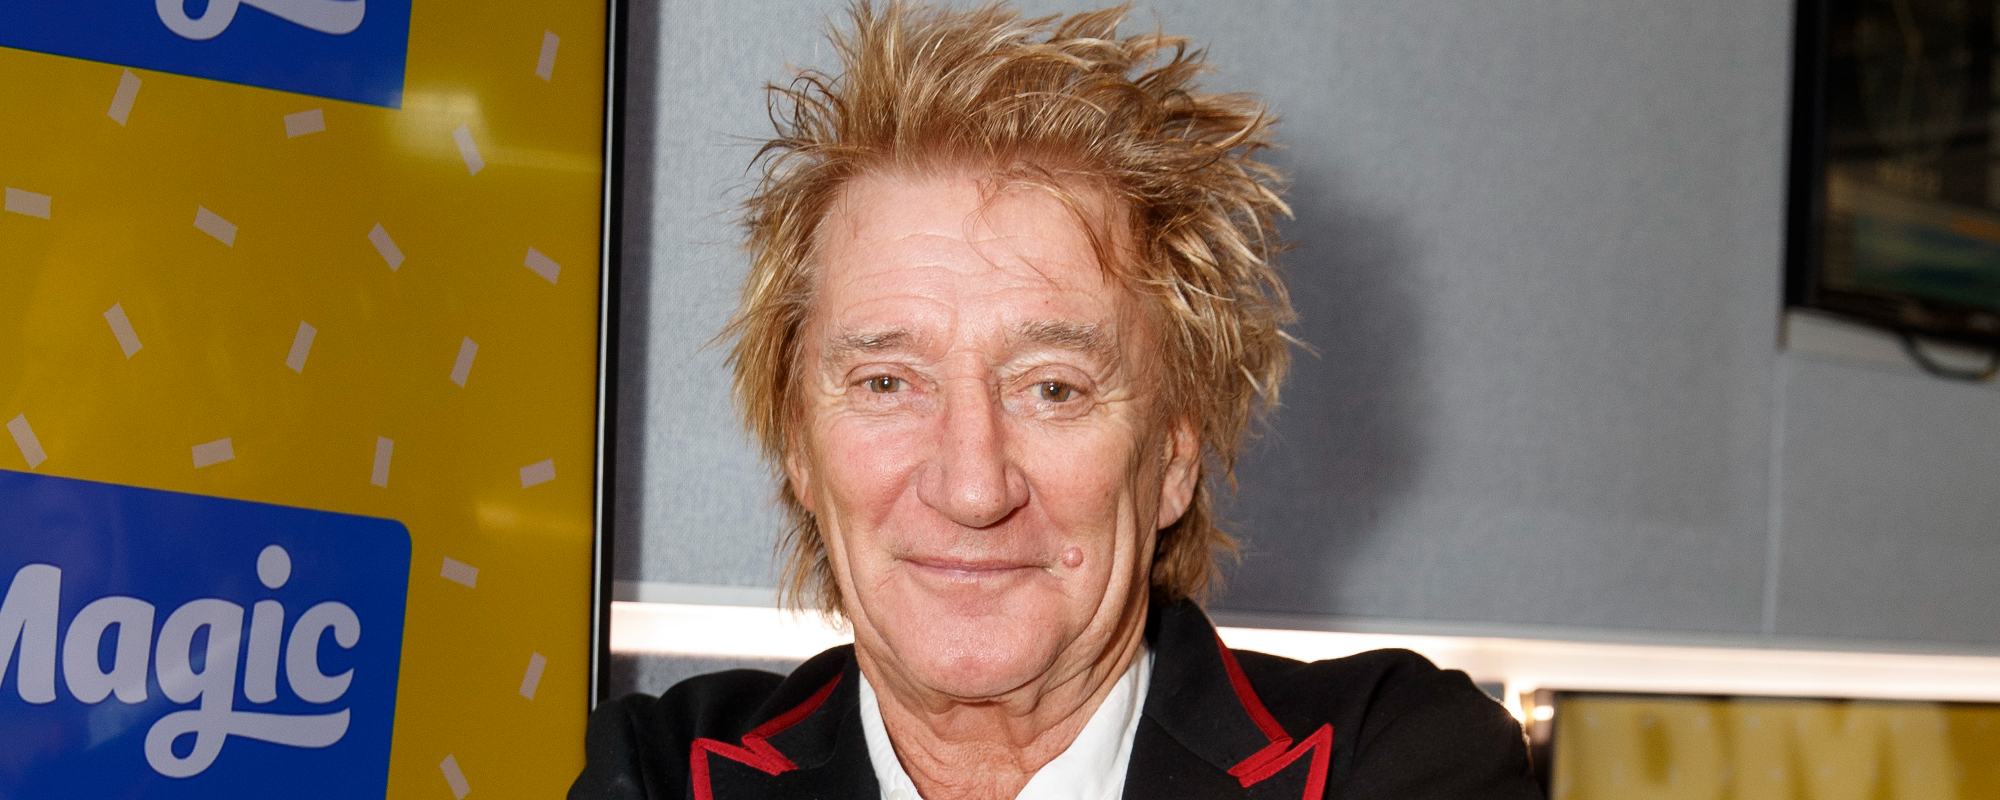 Rod Stewart Gives Staggering Tip to Hotel Staff: “It’s Scottish Hospitality at Its Very Best”